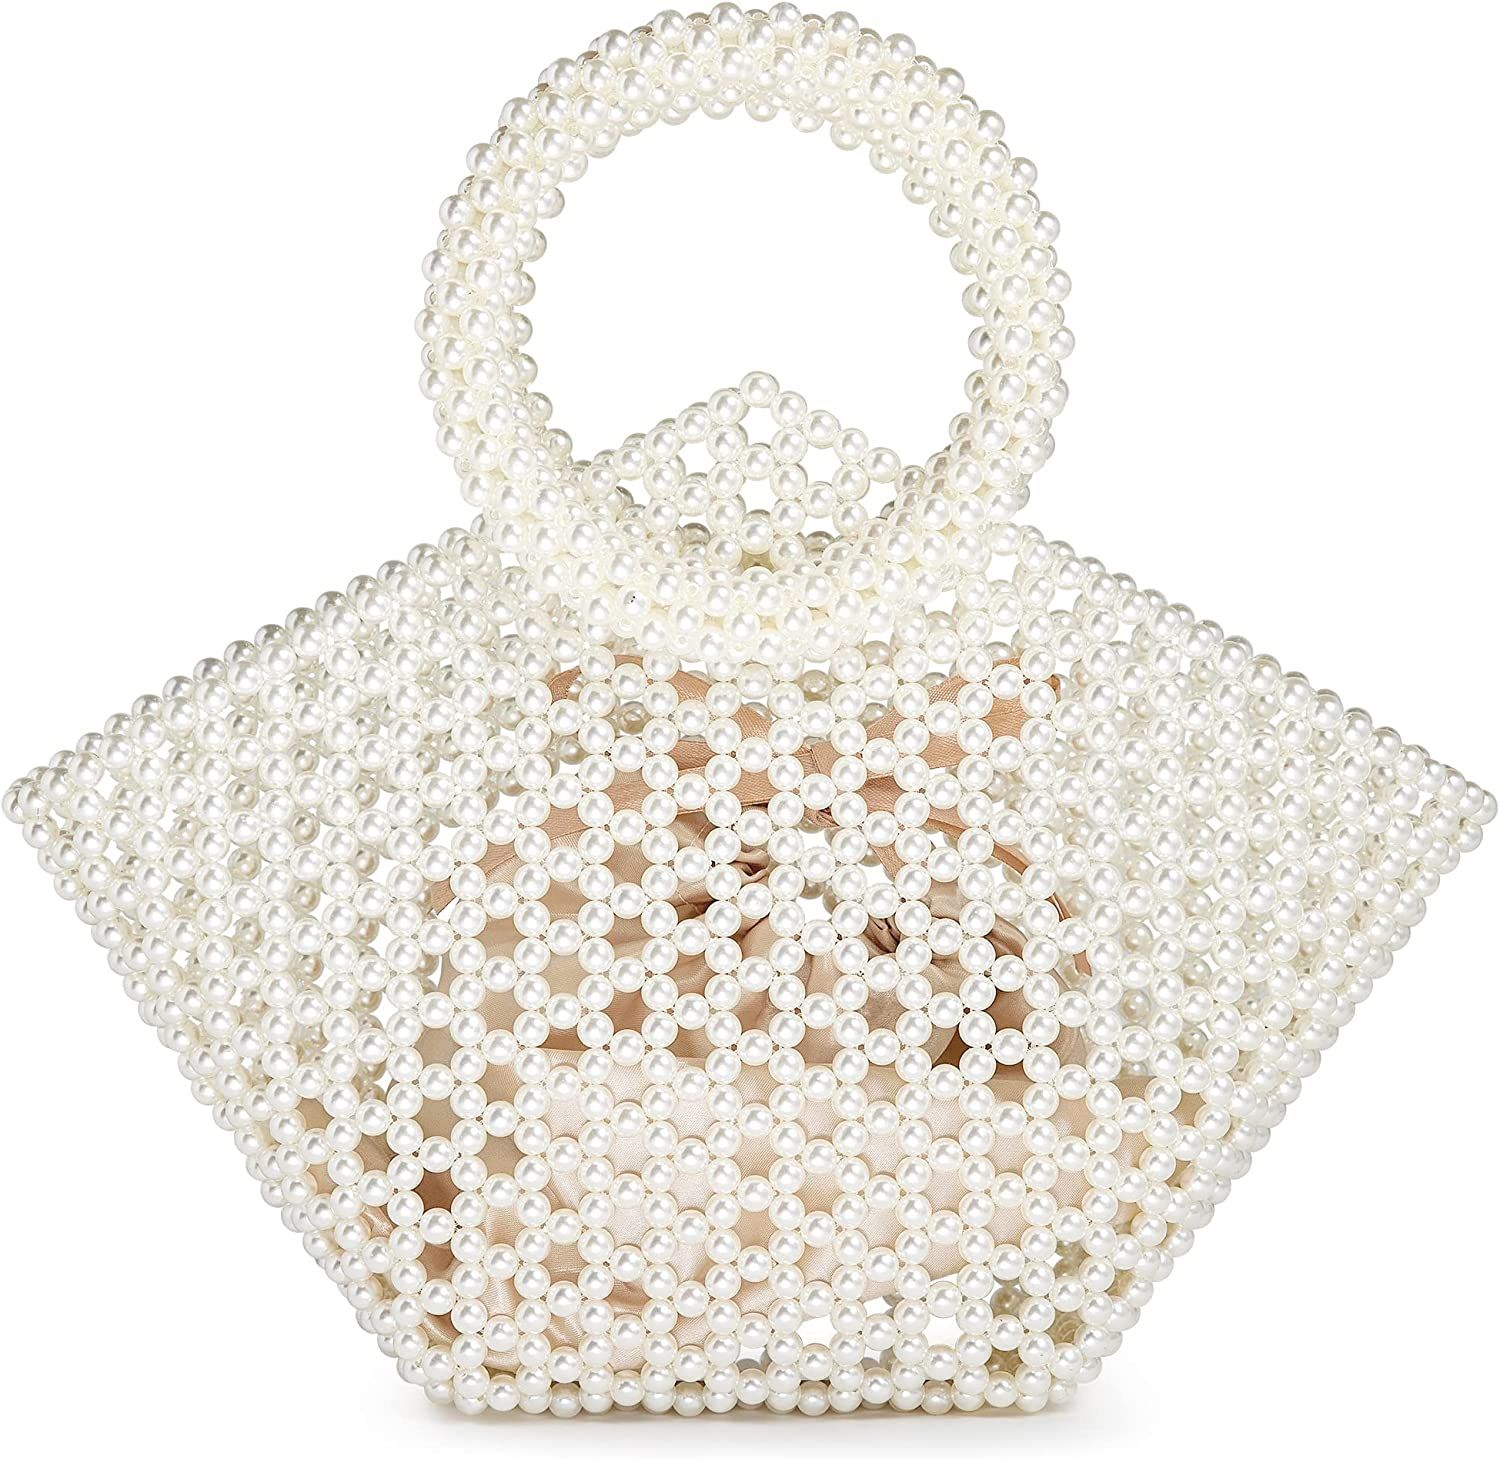 Grandxii Pearl Clutch Purse White Summer Handbag Tote Bag Evening Party Bag With Pearls For Women | Amazon (US)